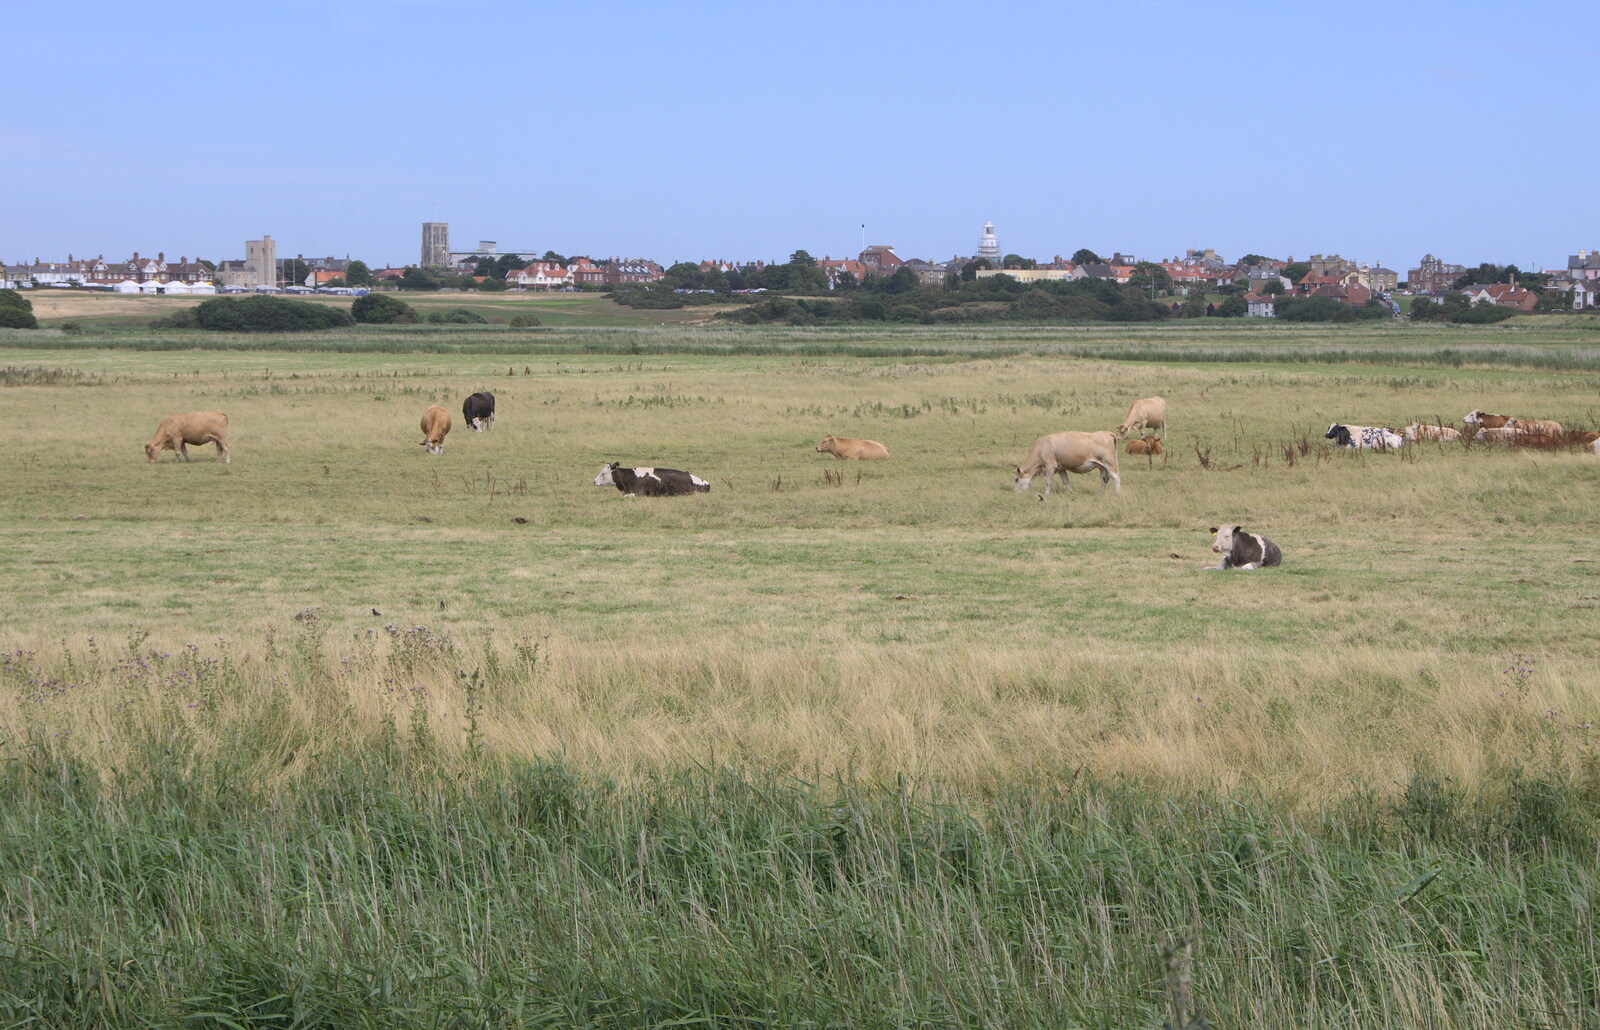 Cows on Southwold Common from The Danger of Trees: A Camping (Mis)adventure - Southwold, Suffolk - 3rd August 2015